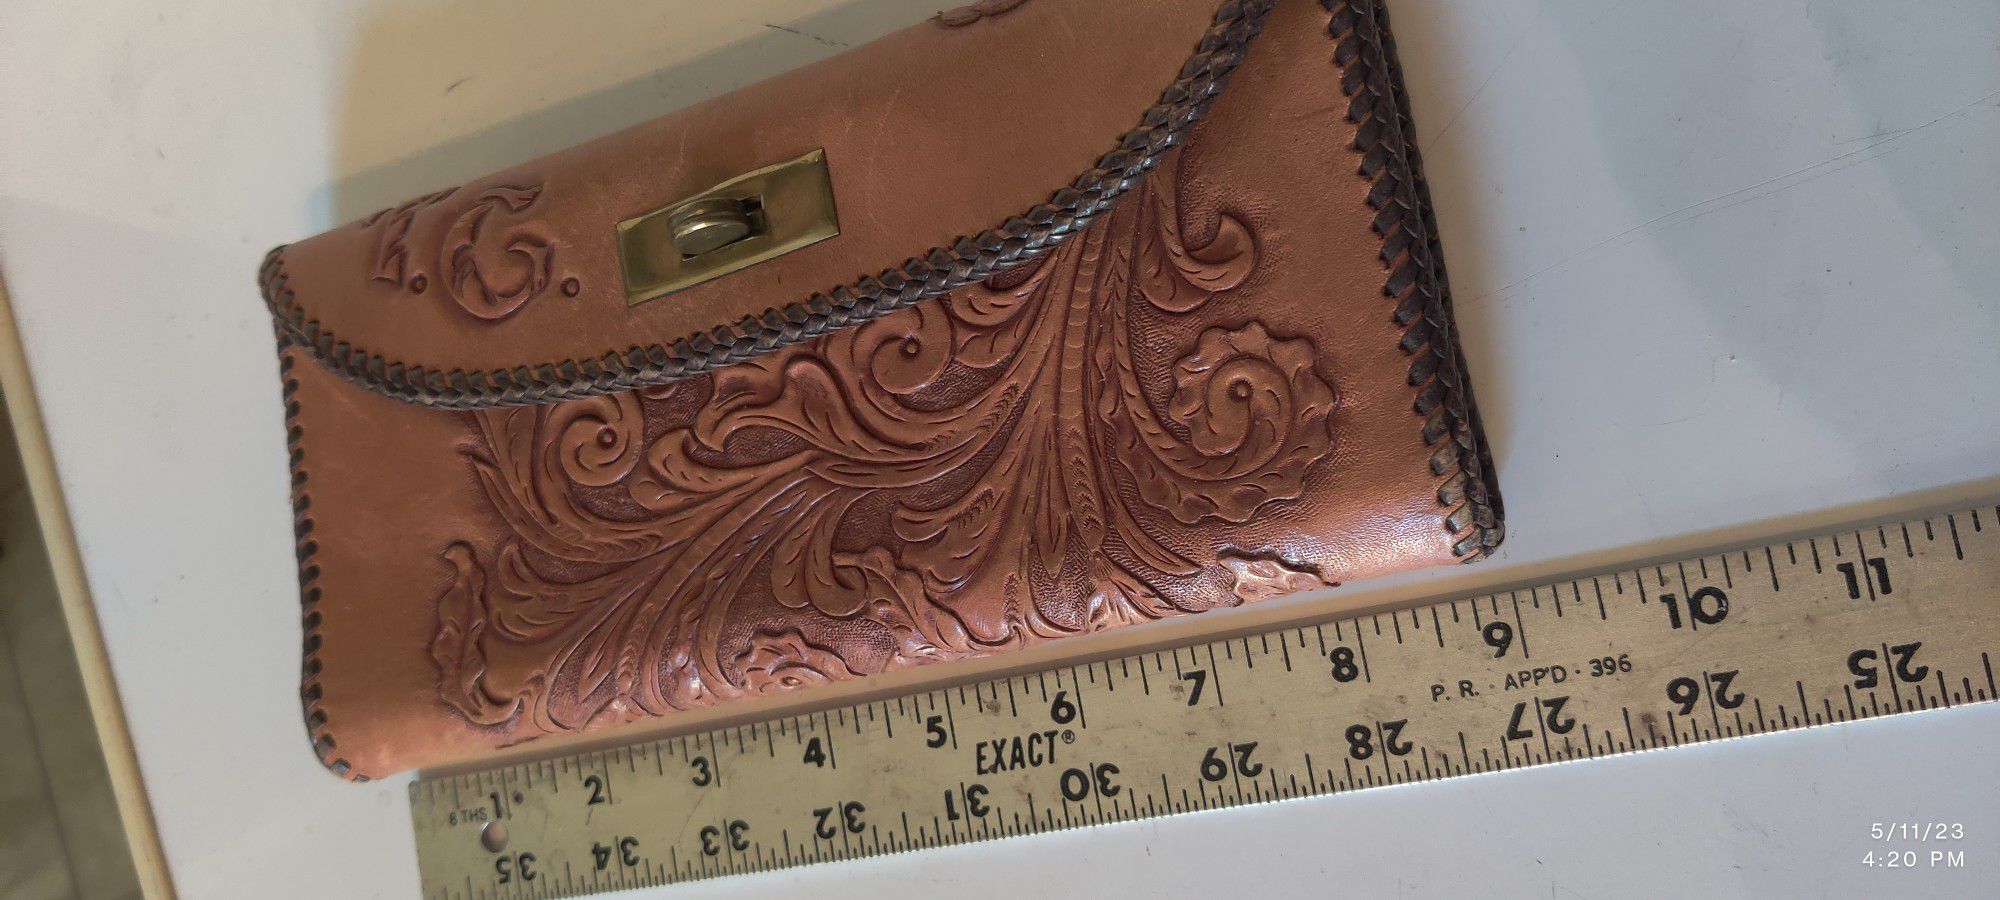 Hand Tooled Wallet Clutch Purse Old Rare Vintage 1980s TOP QUALITY.